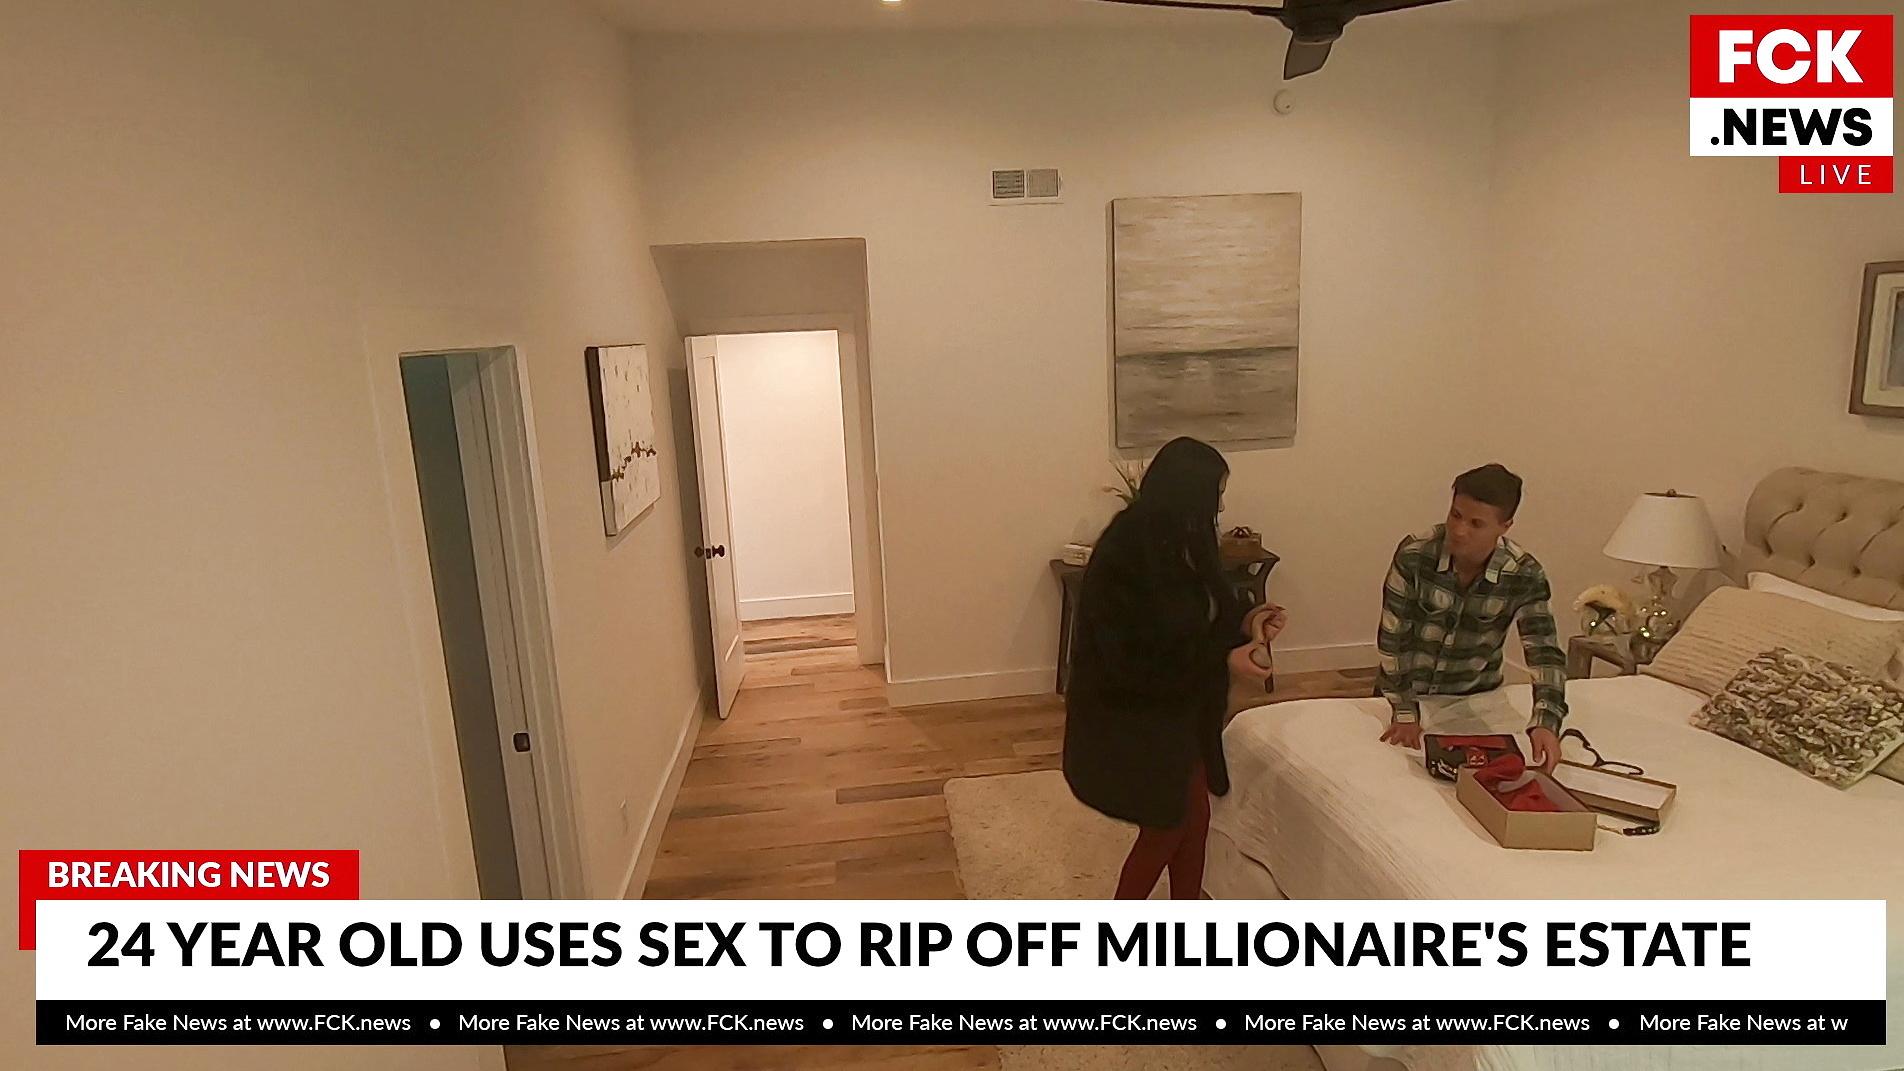 Carolina Cortez uses sex to steal from a millionaire bang pic